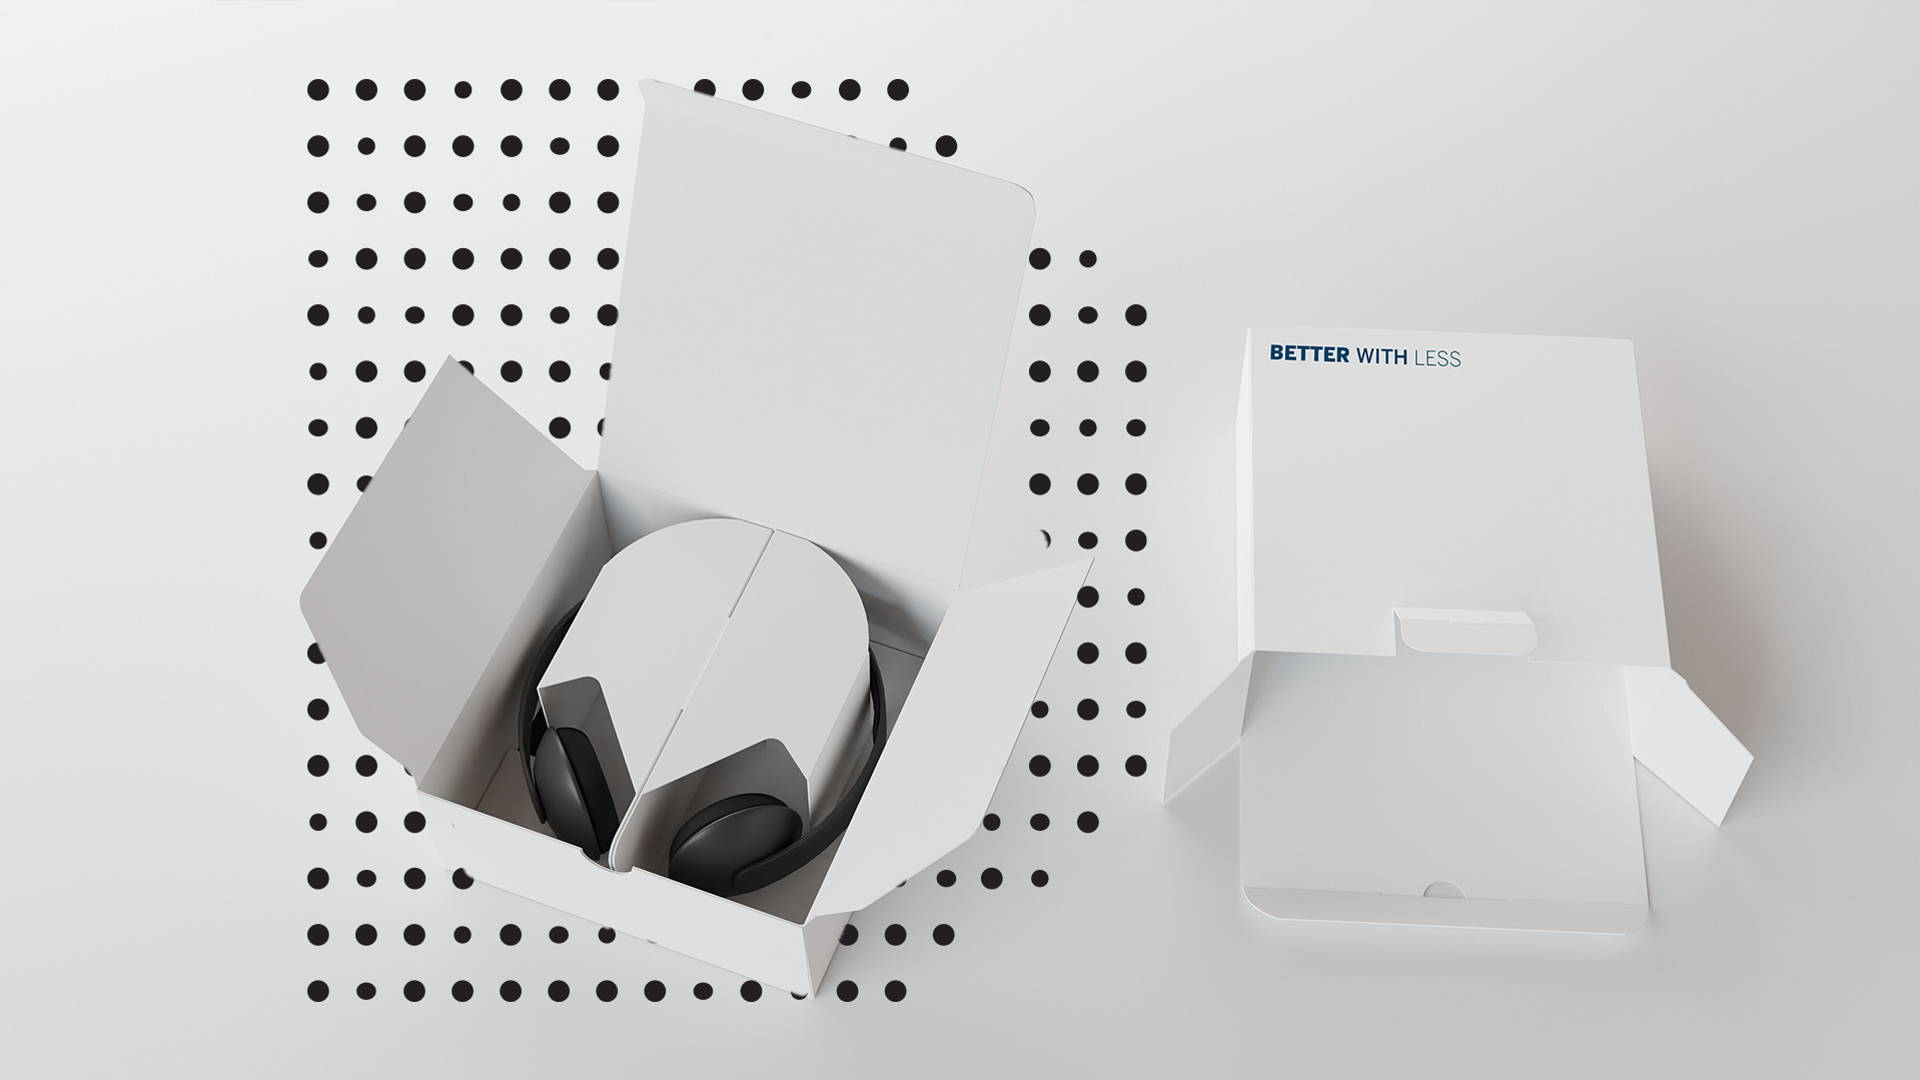 Featured image for Metsä Board Announces Better With Less Design Challenge Award Winners